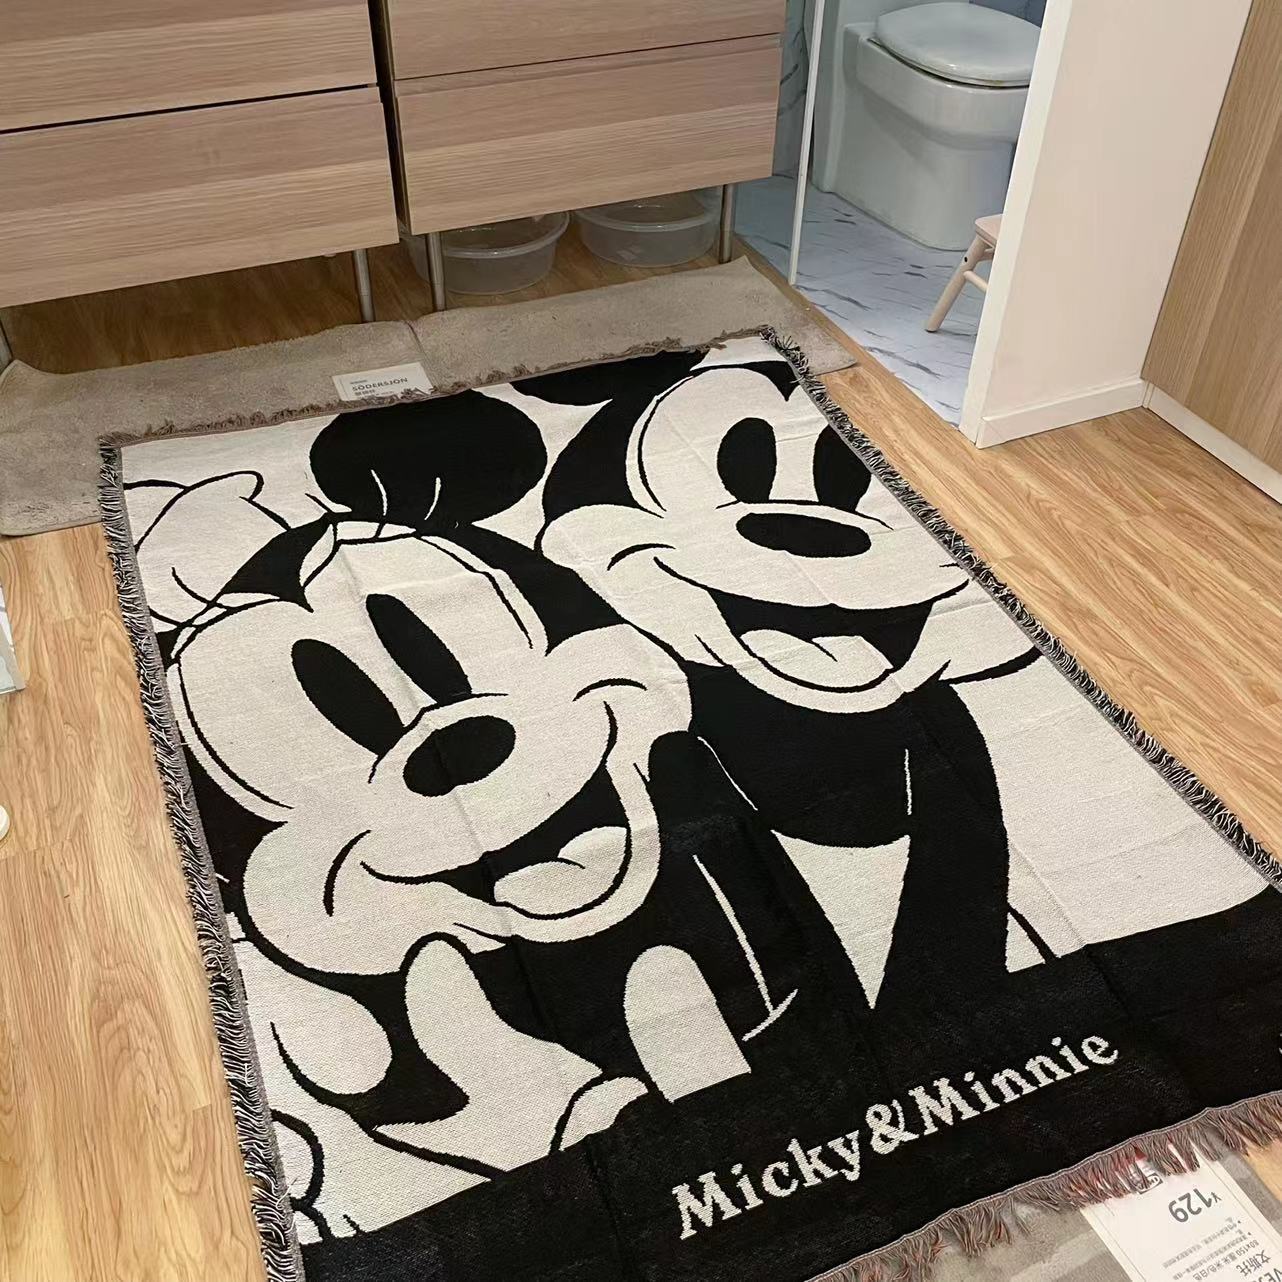 INS Japanese Style Mickey Products Internet Celebrity Same Style Sofa Cover Nap Blanket Cover Blanket Decorative Blanket